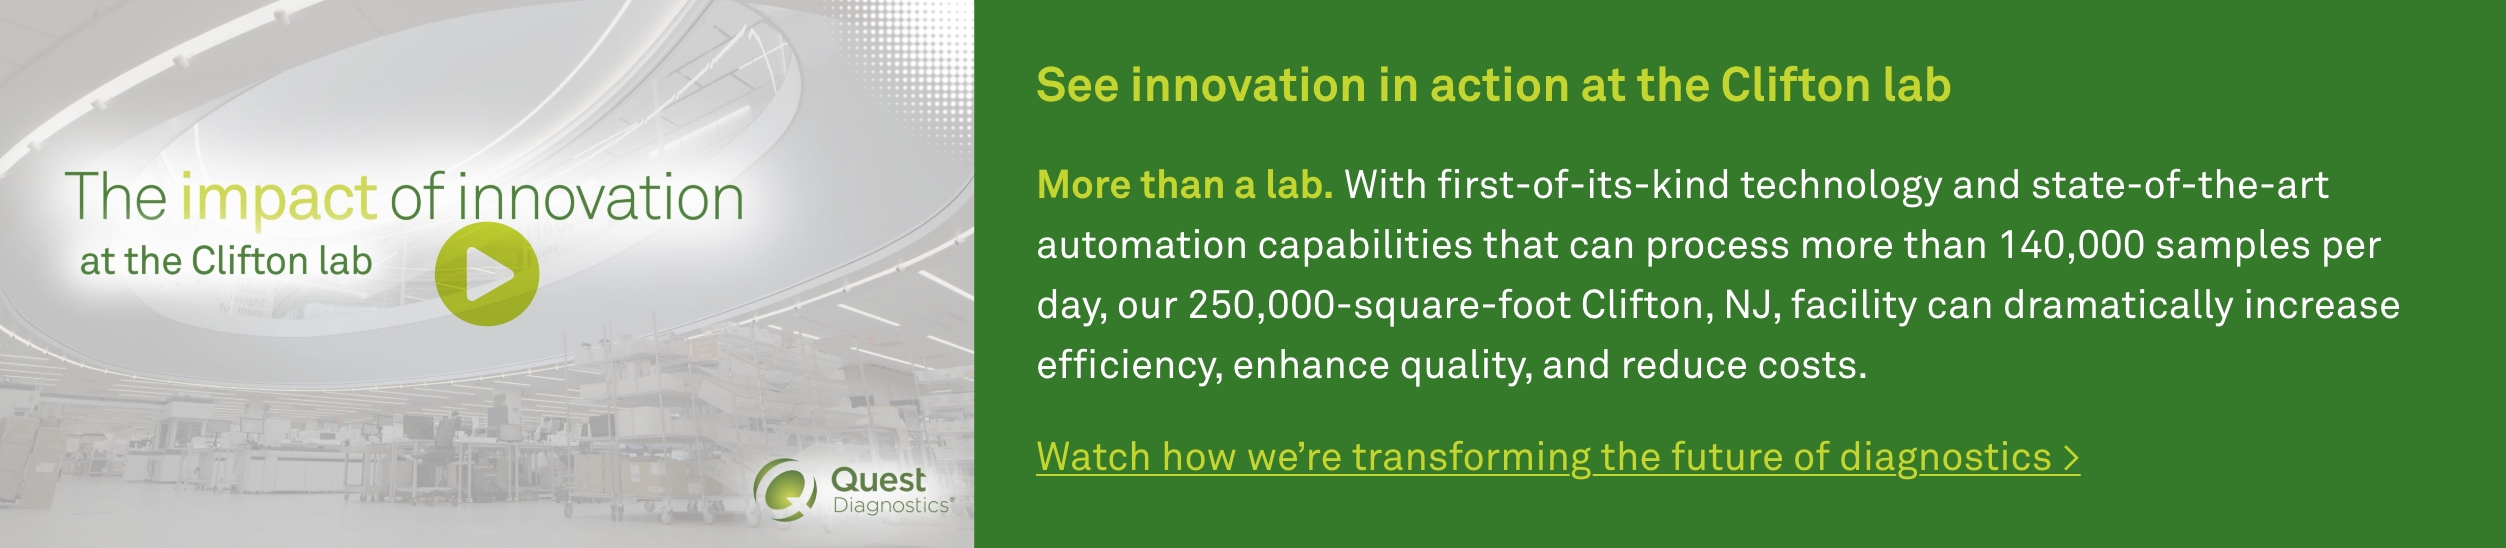 See innovation in action at the Clifton Lab